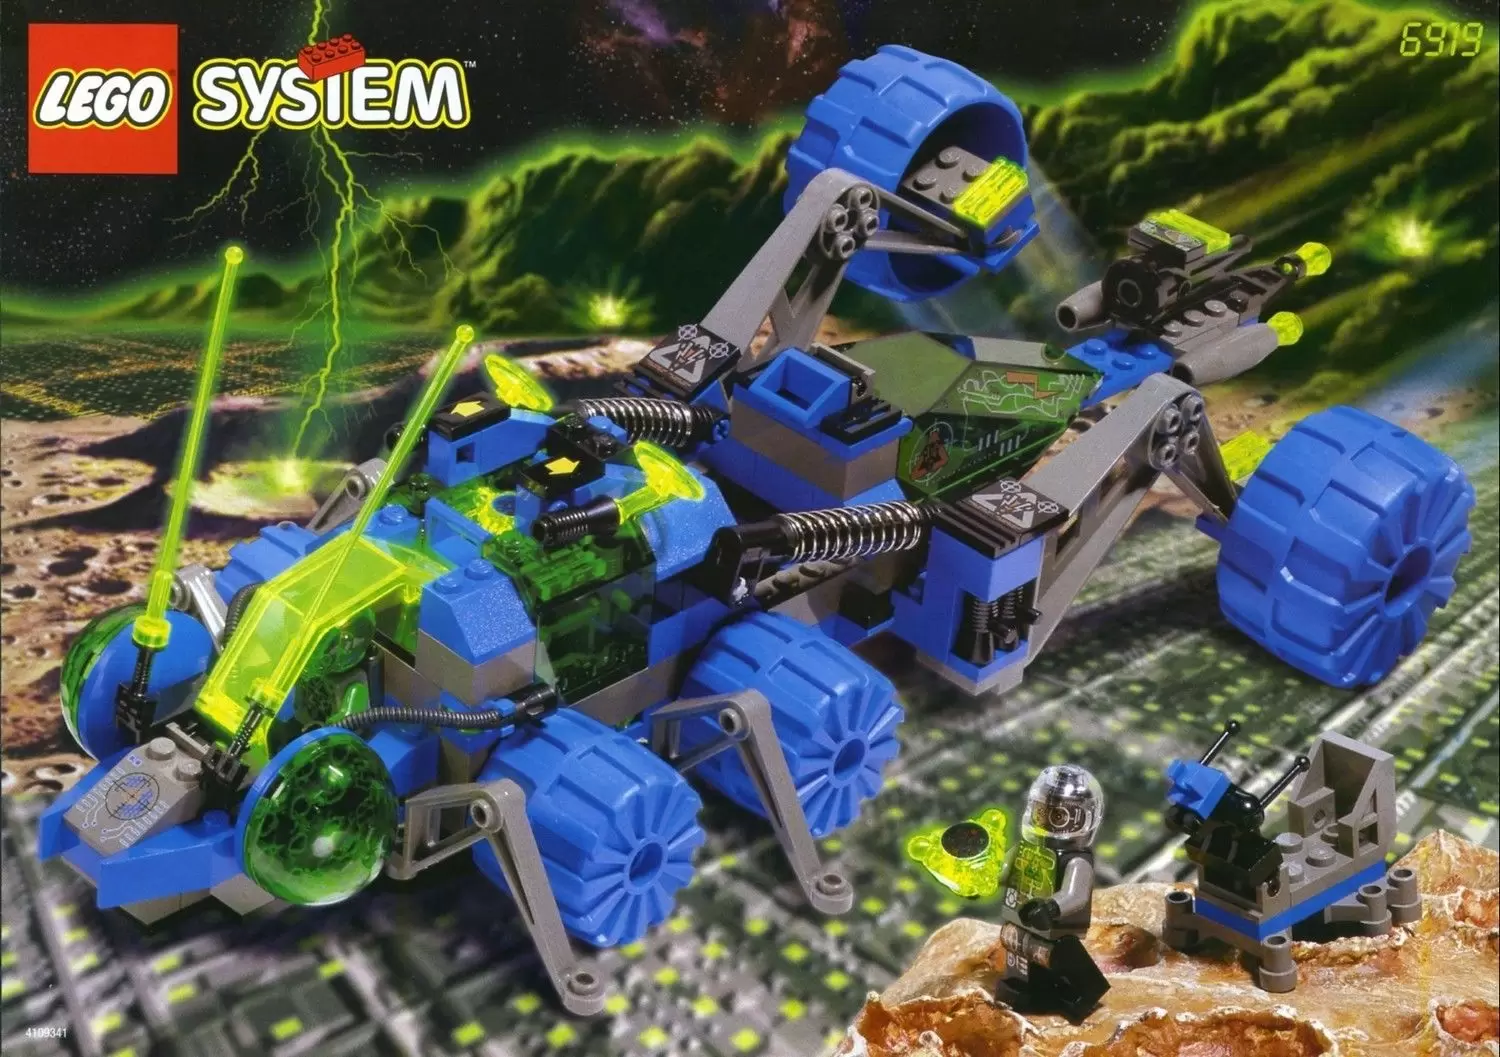 LEGO Space - Planetary Prowler